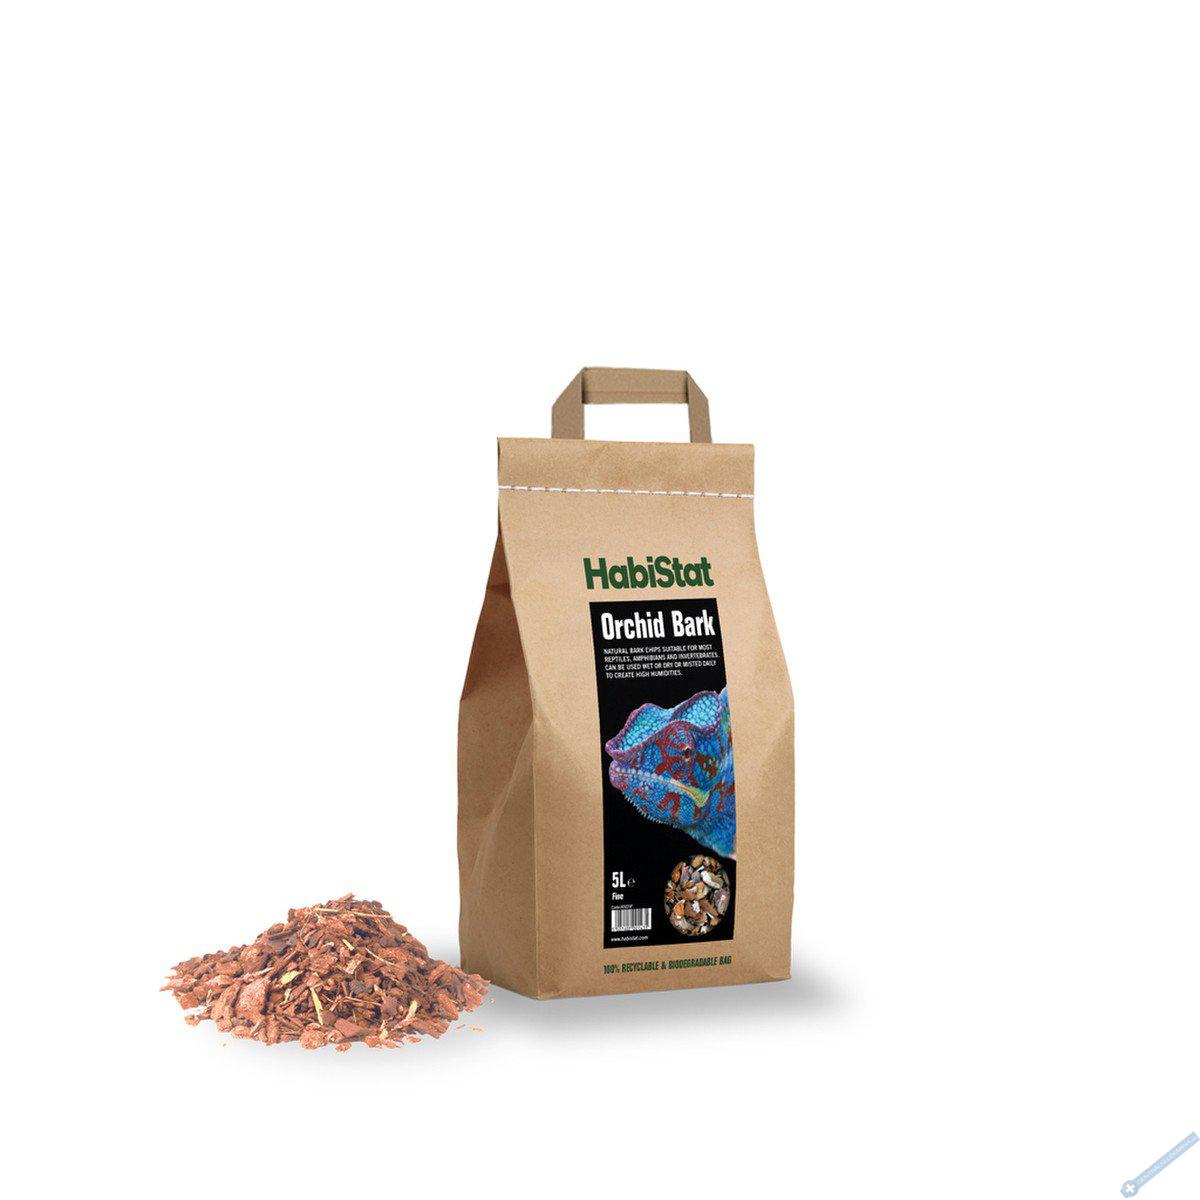 HabiStat Orchid Bark Substrate jemn 5l